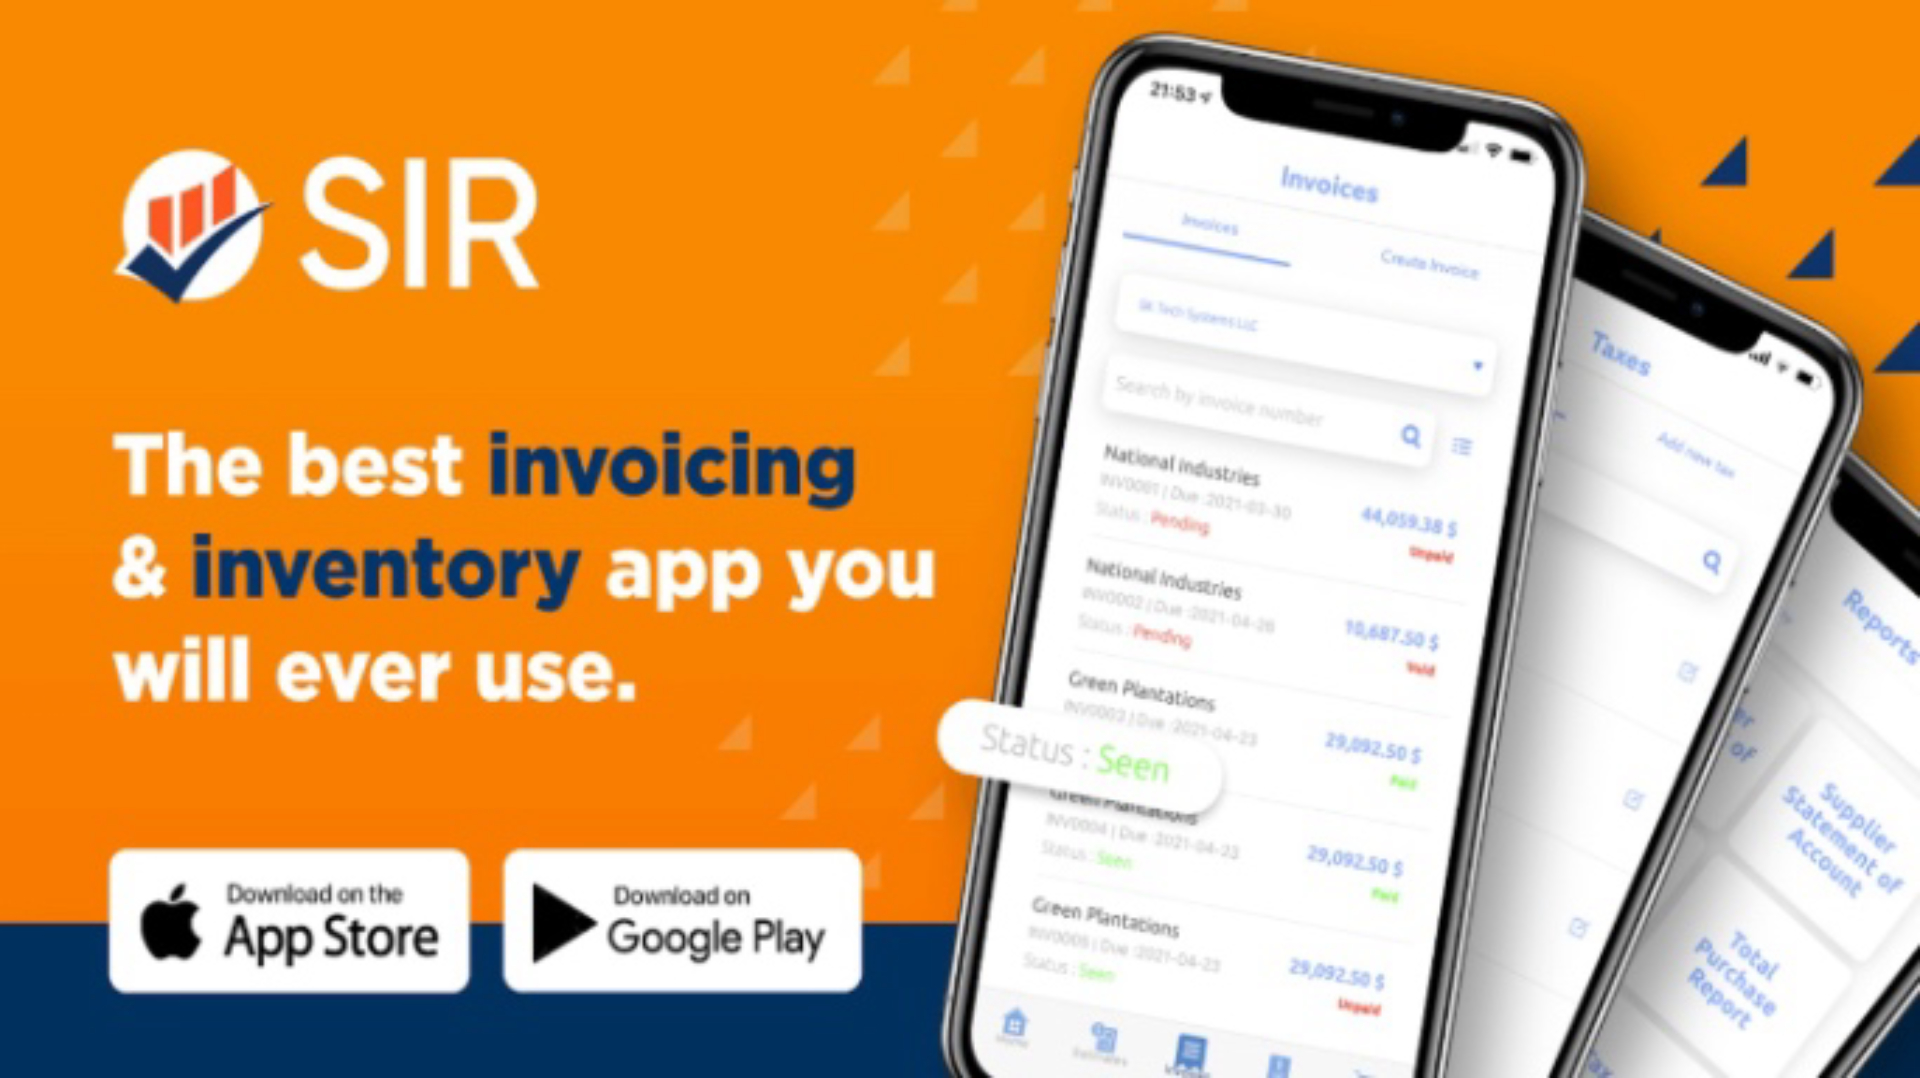 Lifetime Deal to SIR: Simple Invoice & Receipt Maker: Truly Unlimited for $49